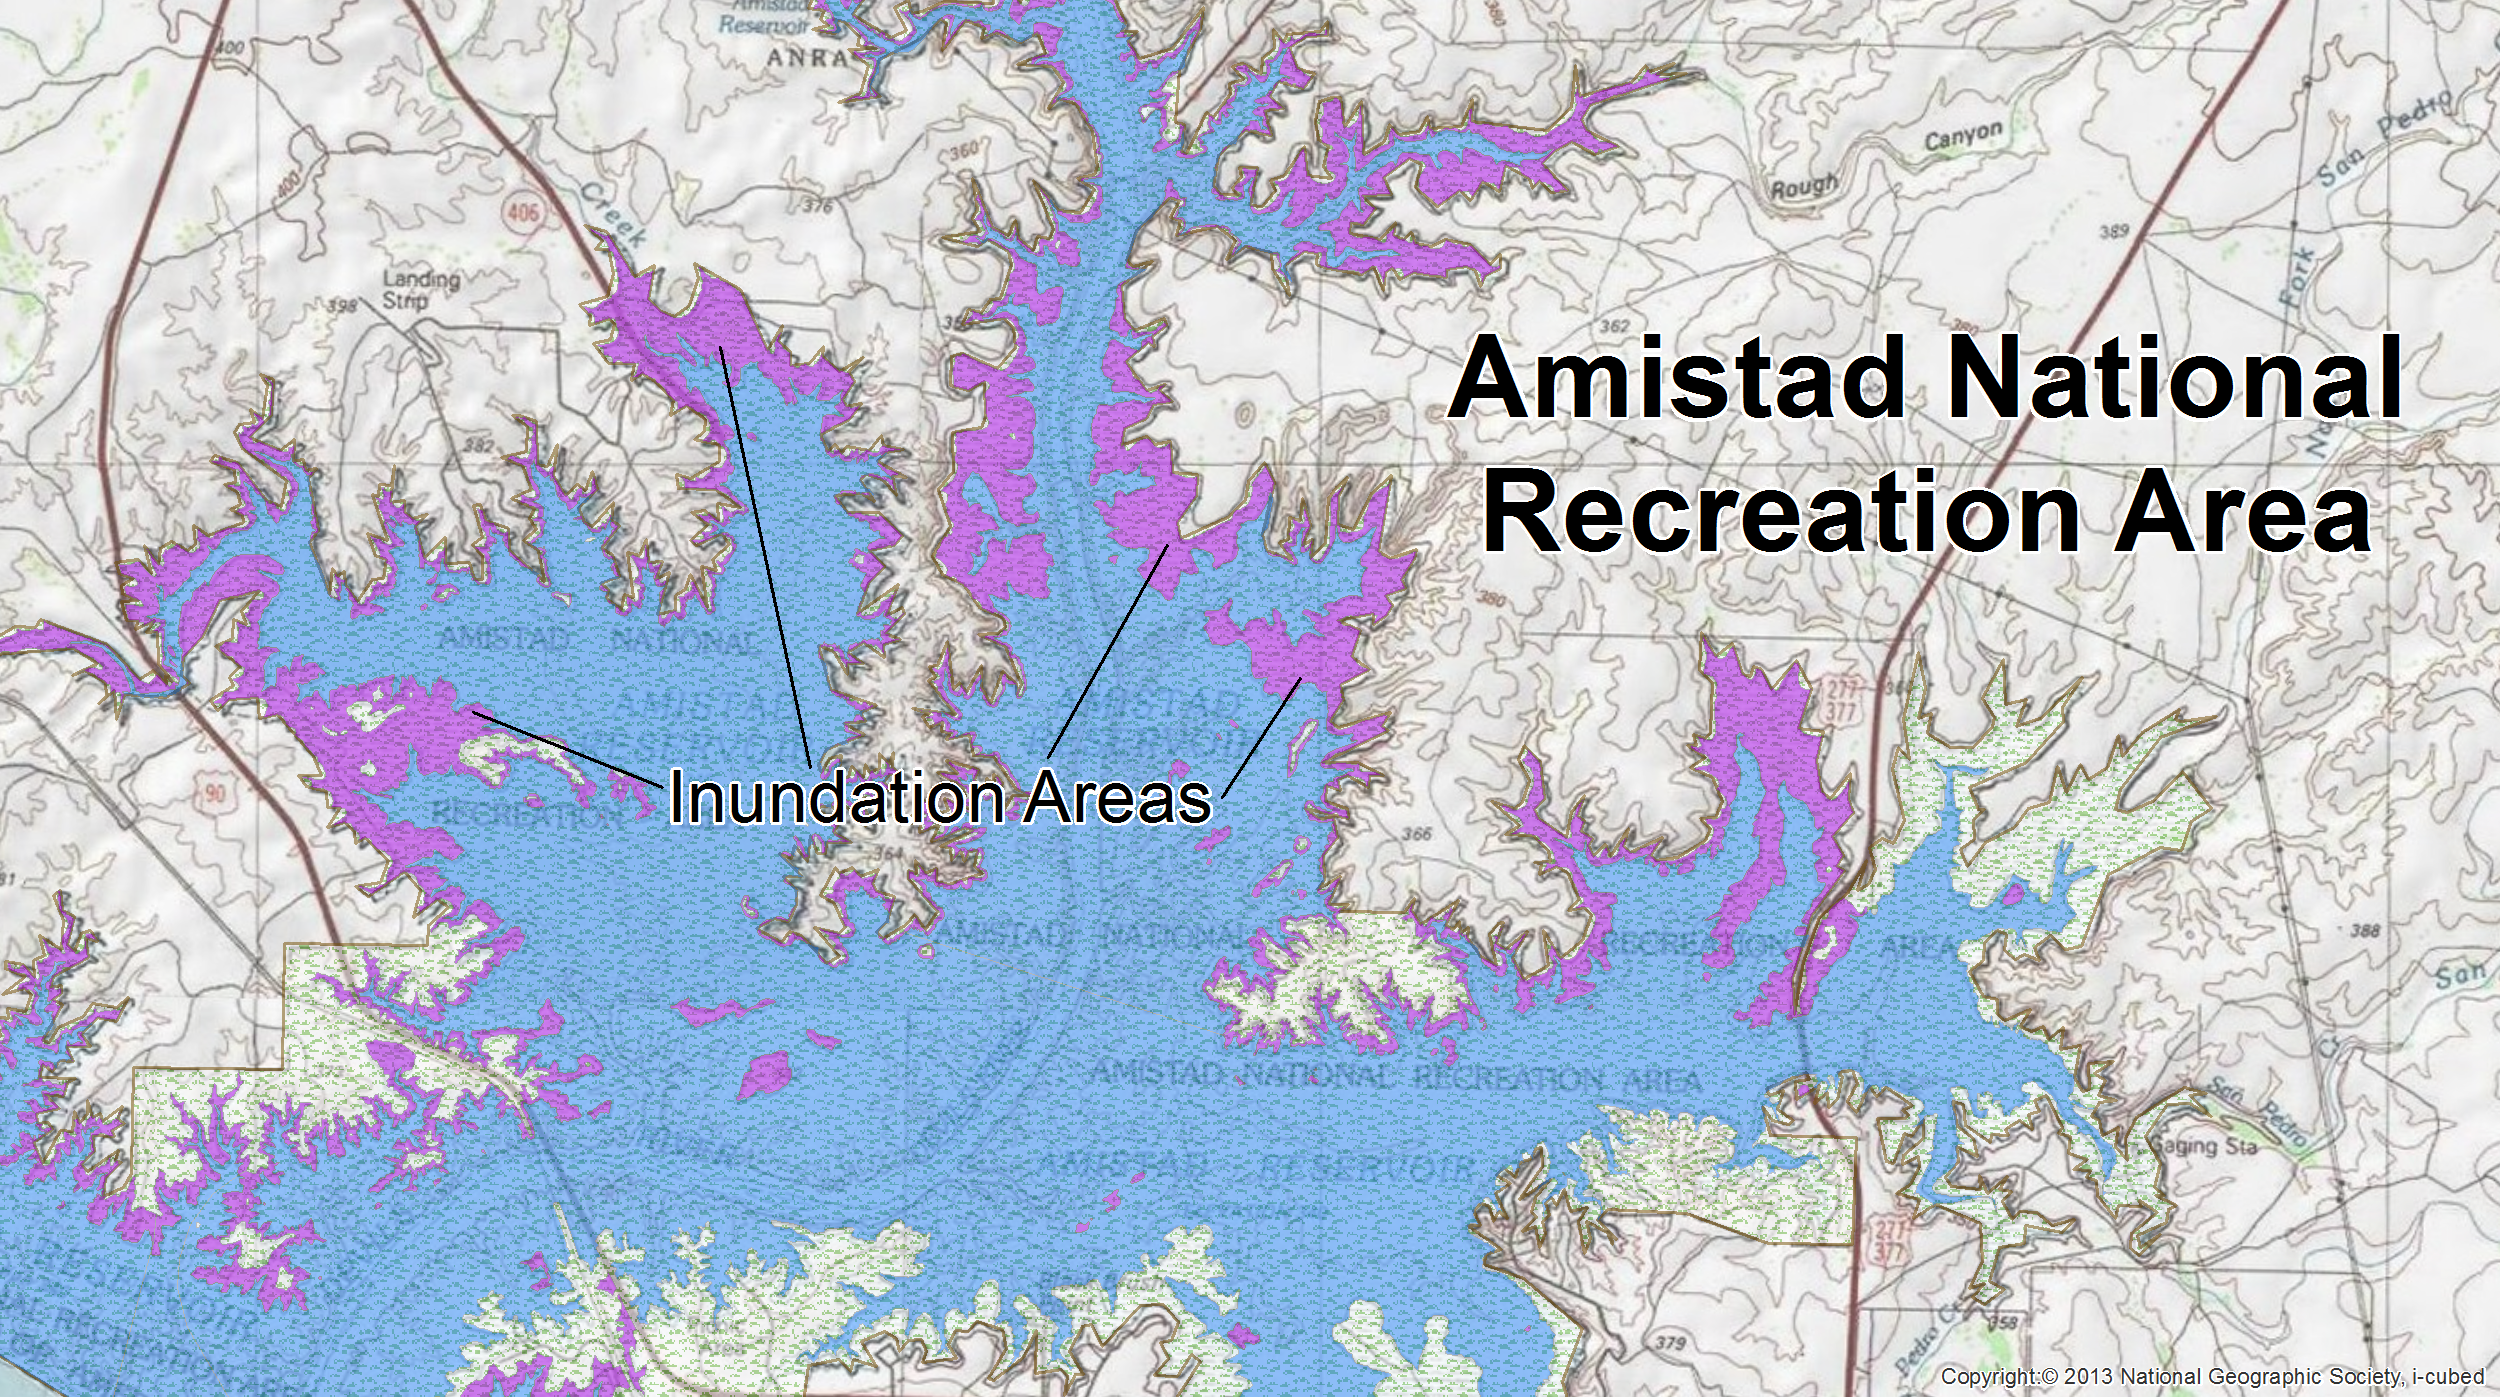 The purple polygon represents the NHDArea depiction of inundation areas surrounding the Amistad Reservoir.